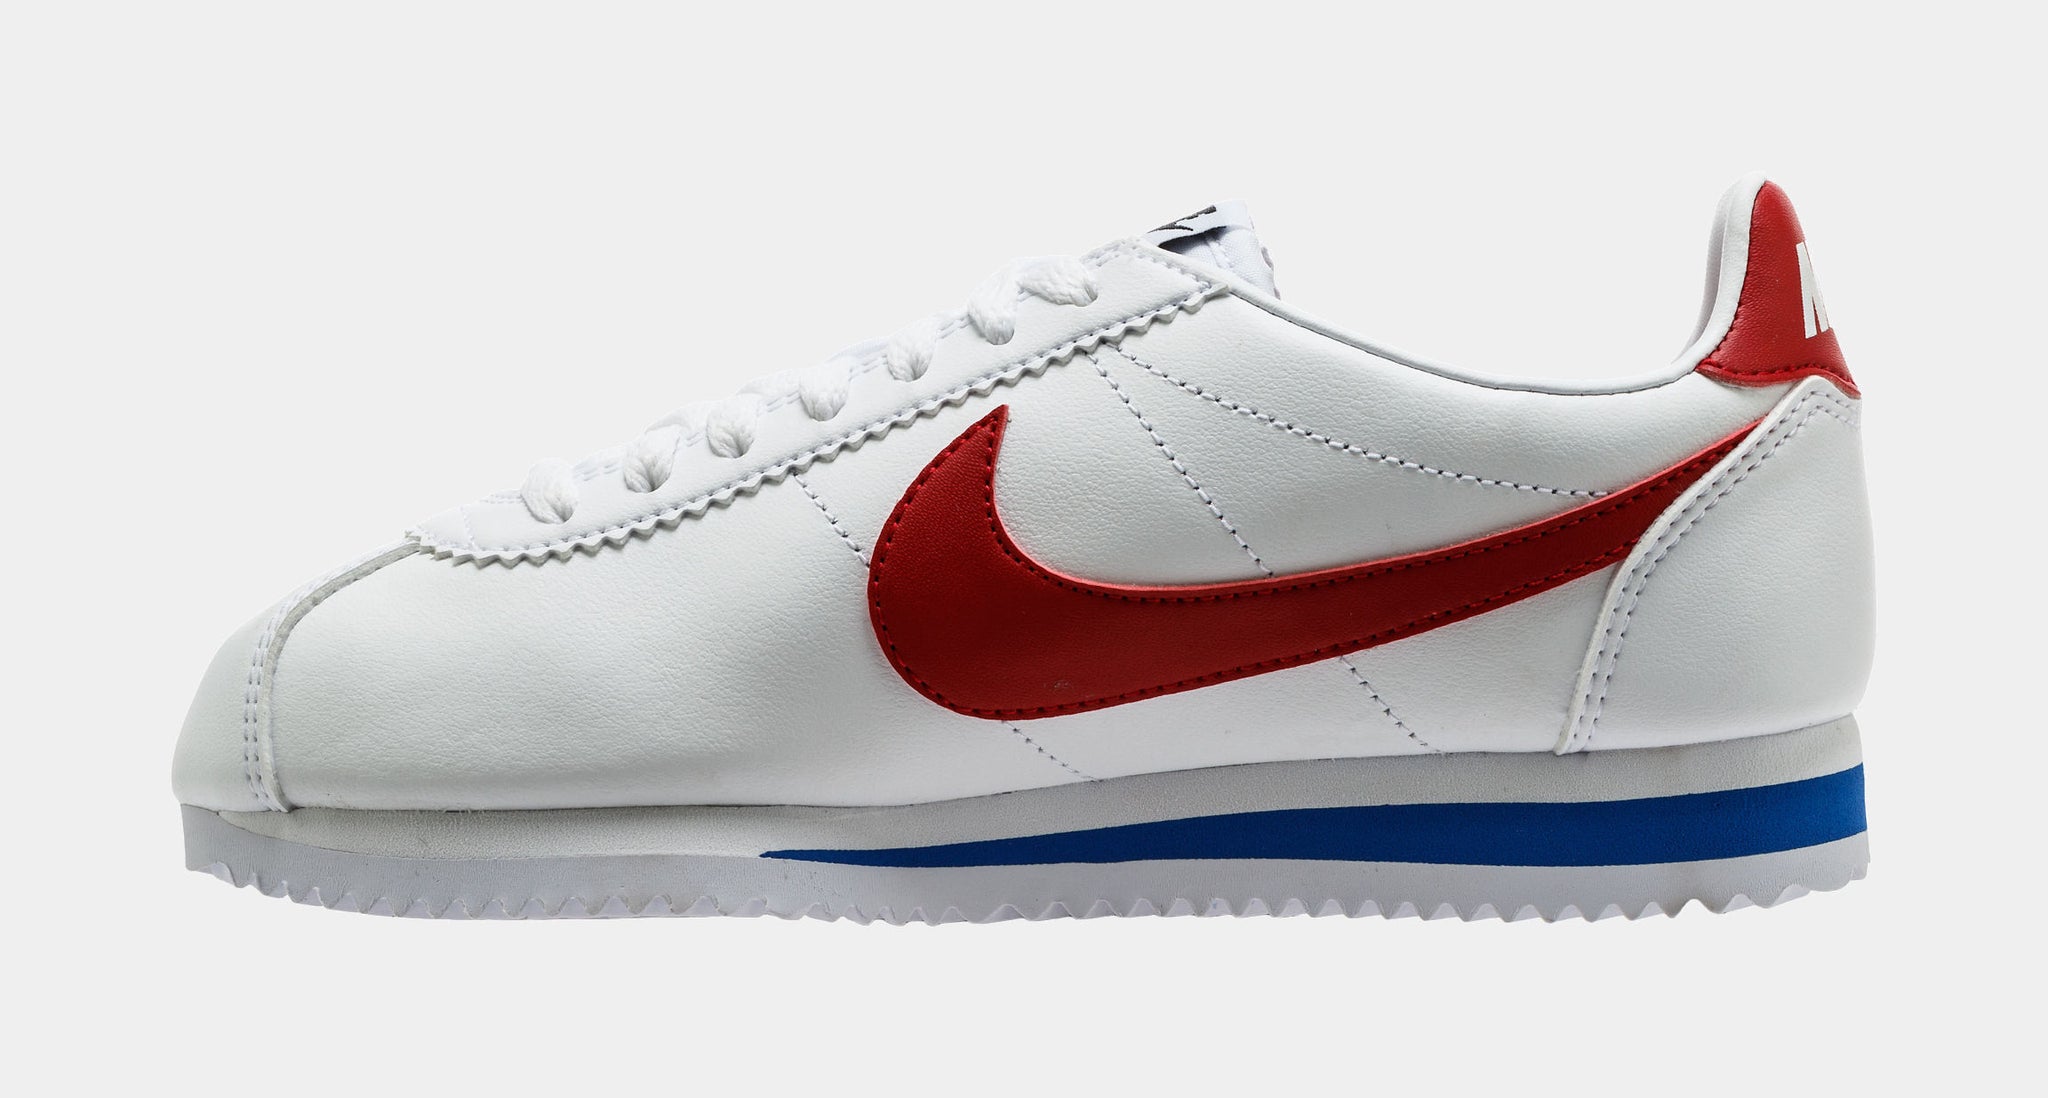 606 - Nike Classic Cortez Leather Pink Red White 905614